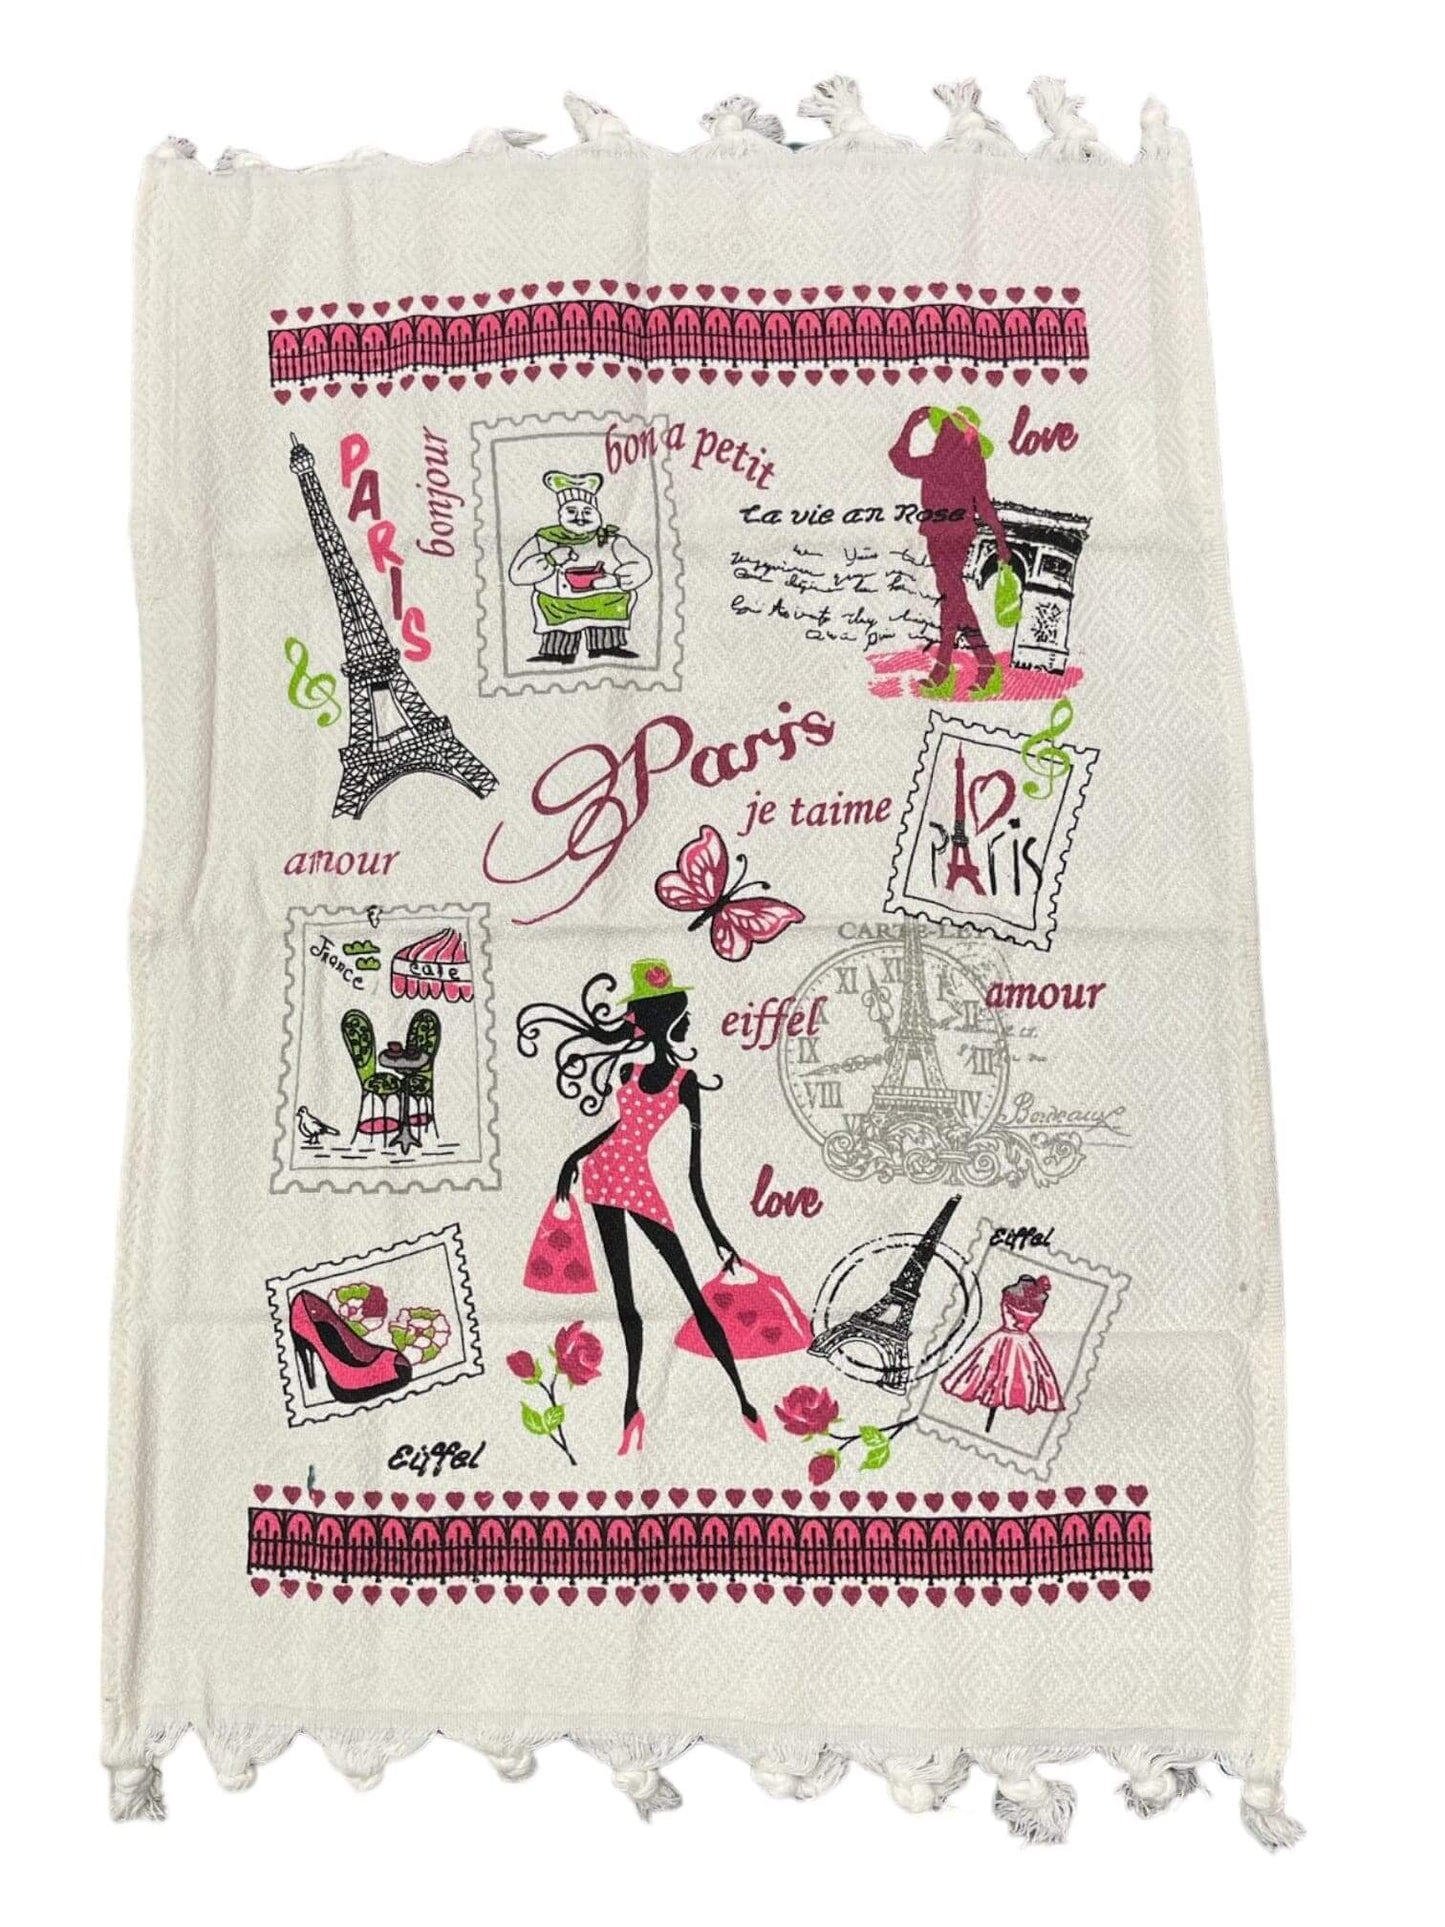 Tea Towels (Cotton Kitchen Towels) Paris100% Cotton Tea Towel, made in Turkey, These towels offer premium quality with their pure cotton composition, ensuring high absorbency for drying dishes and versatile use in various kitchen tasks. Their durability s